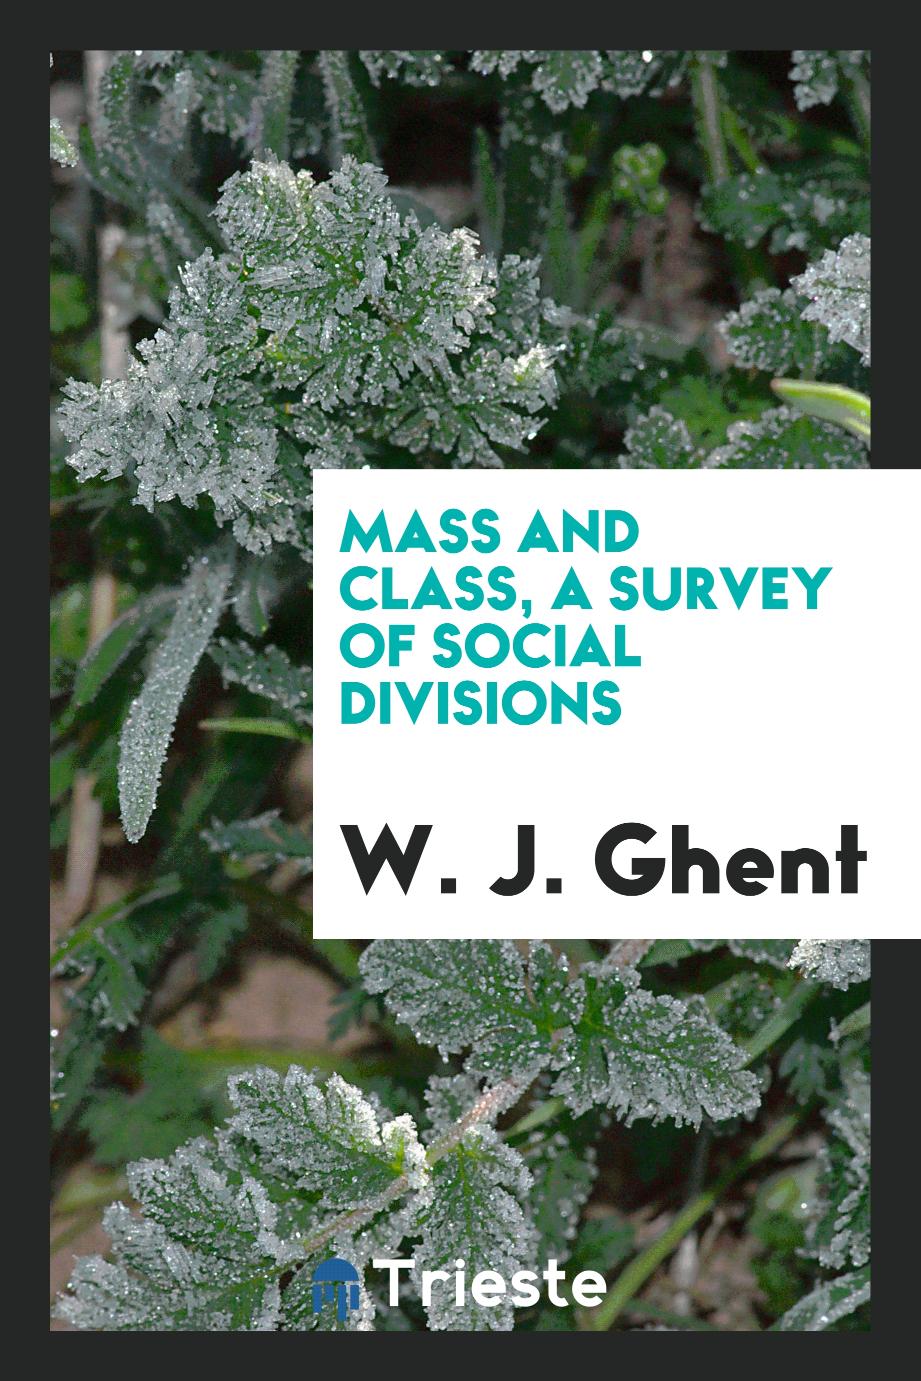 Mass and class, a survey of social divisions